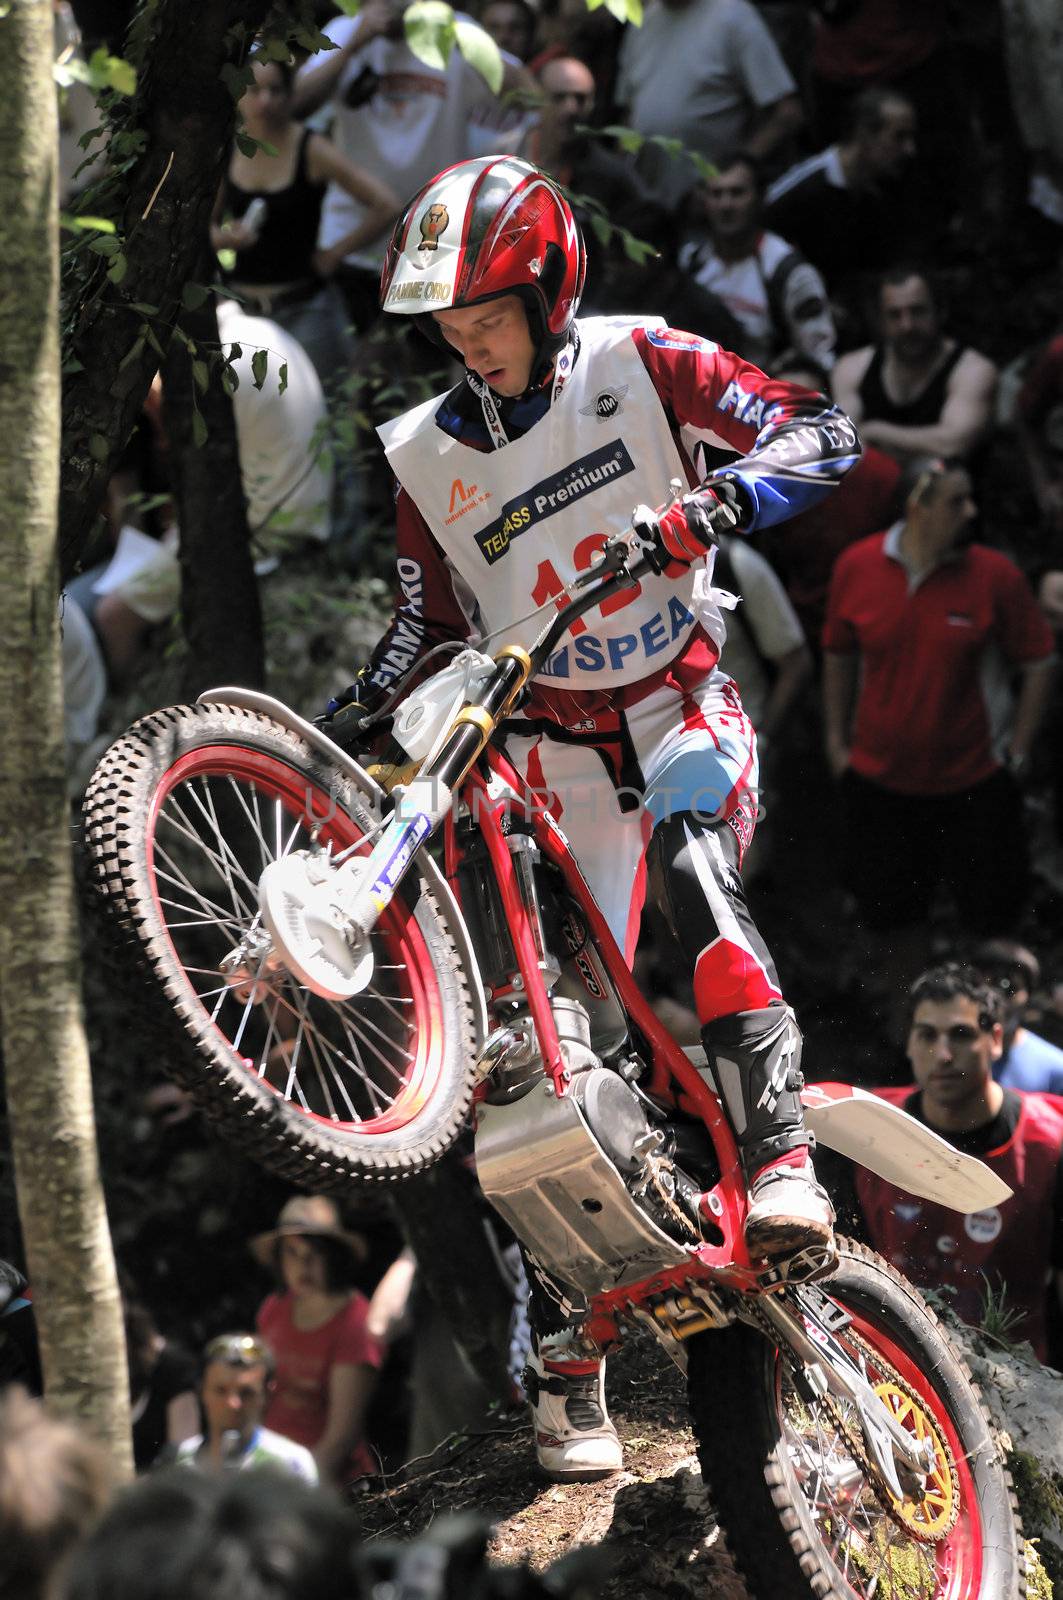 Rider in action during the competition